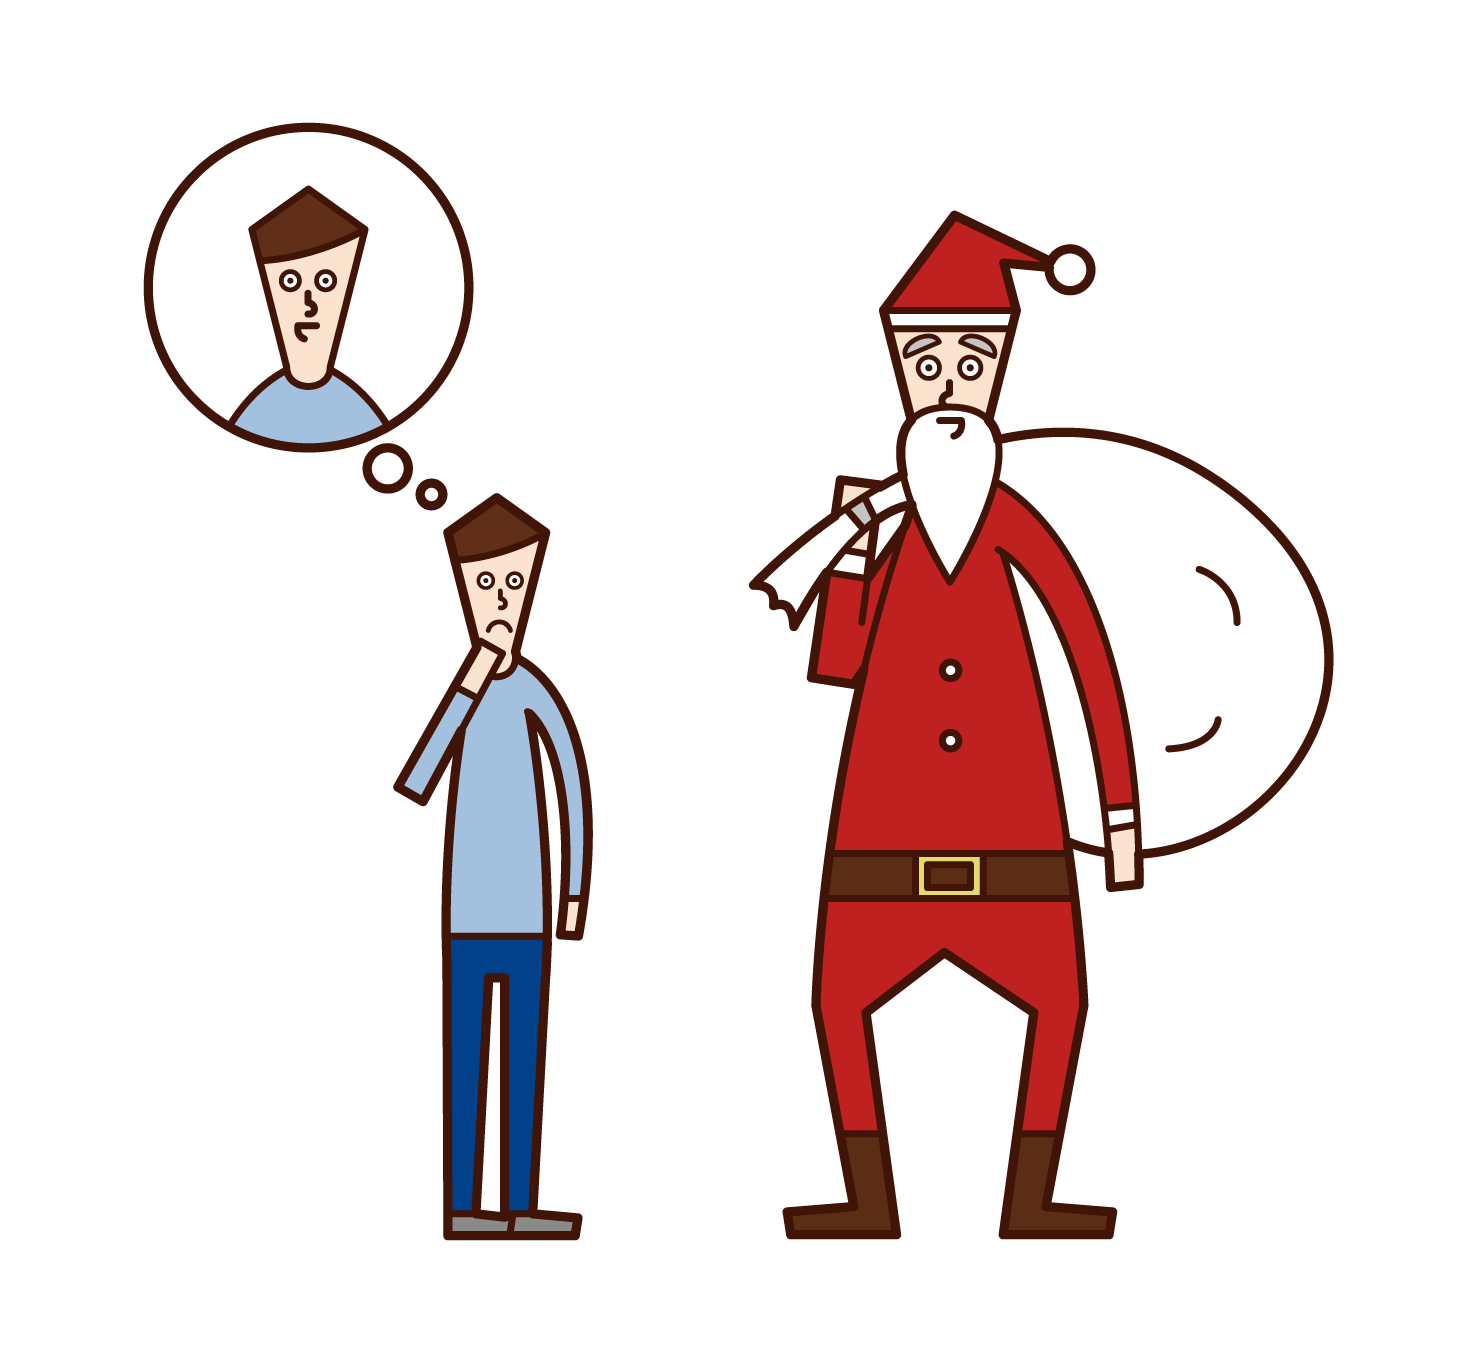 Illustration of a child (boy) who doubts the identity of Santa Claus